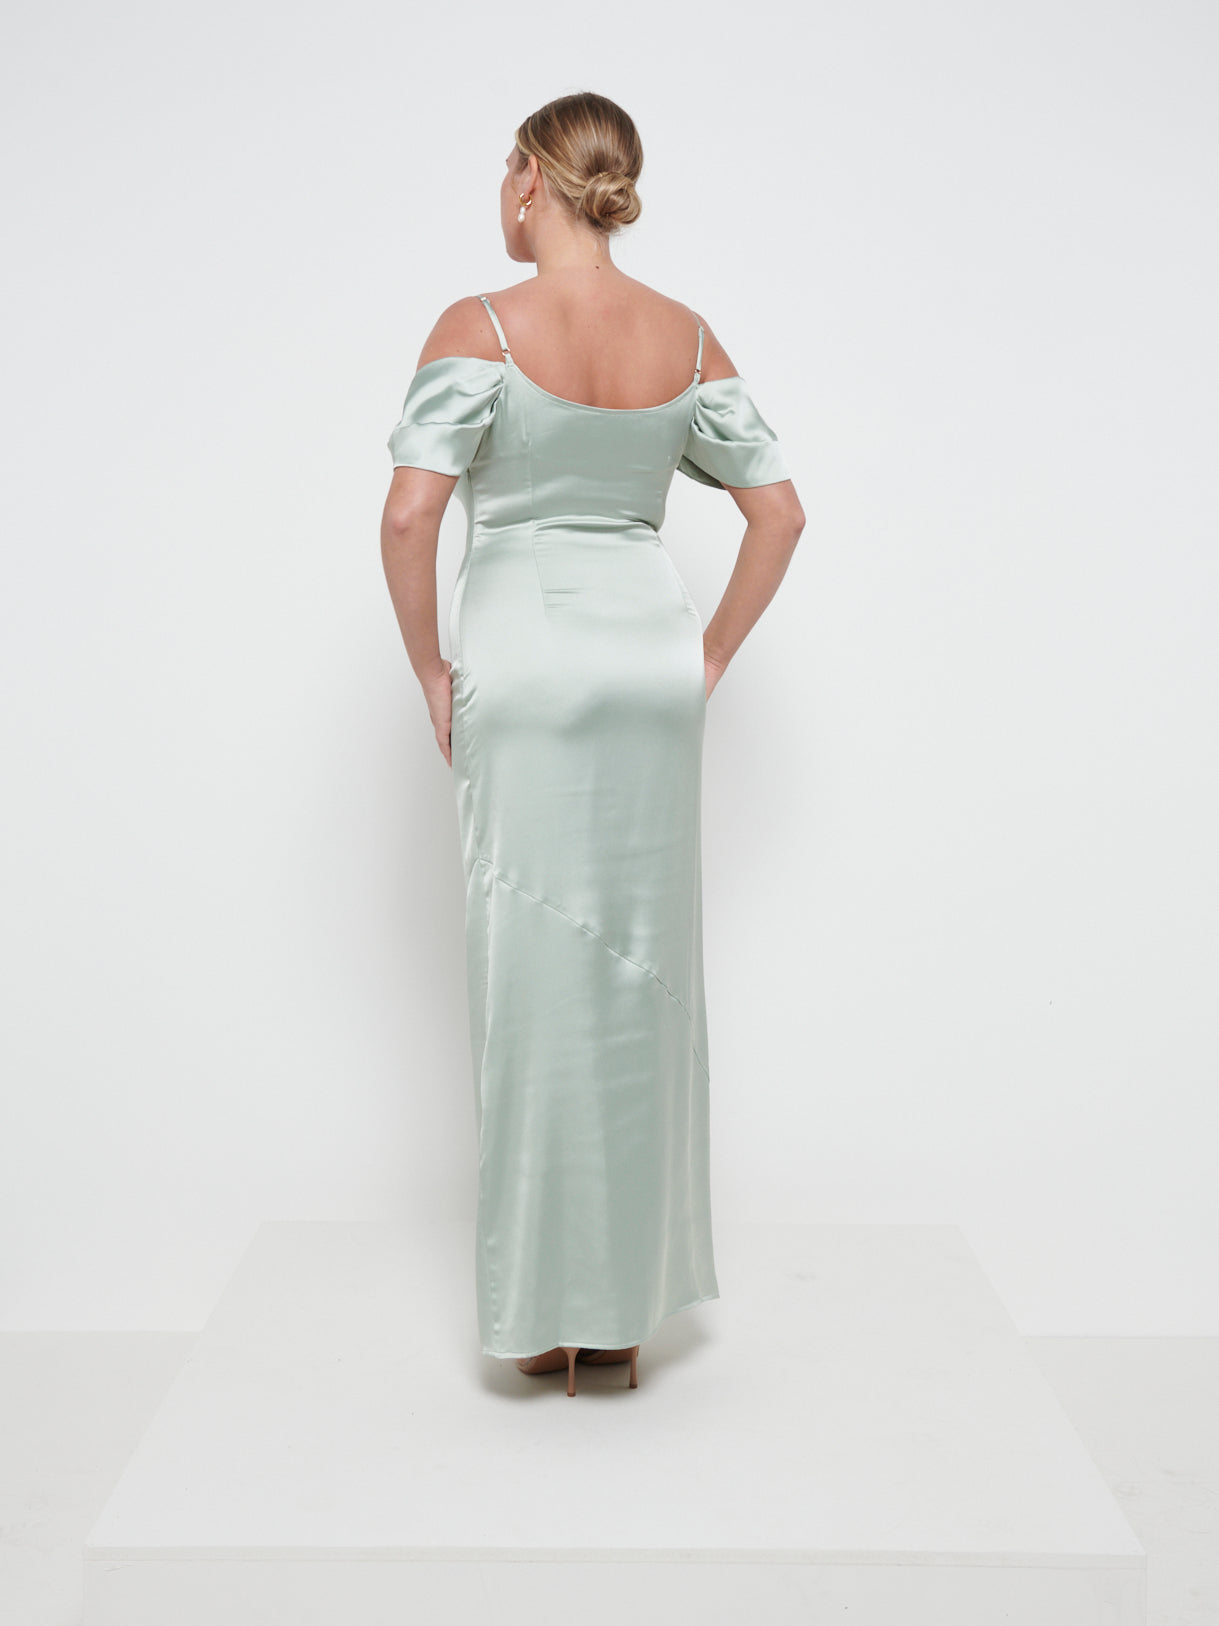 Lucette Recycled Maxi Bridesmaid Dress - Sage